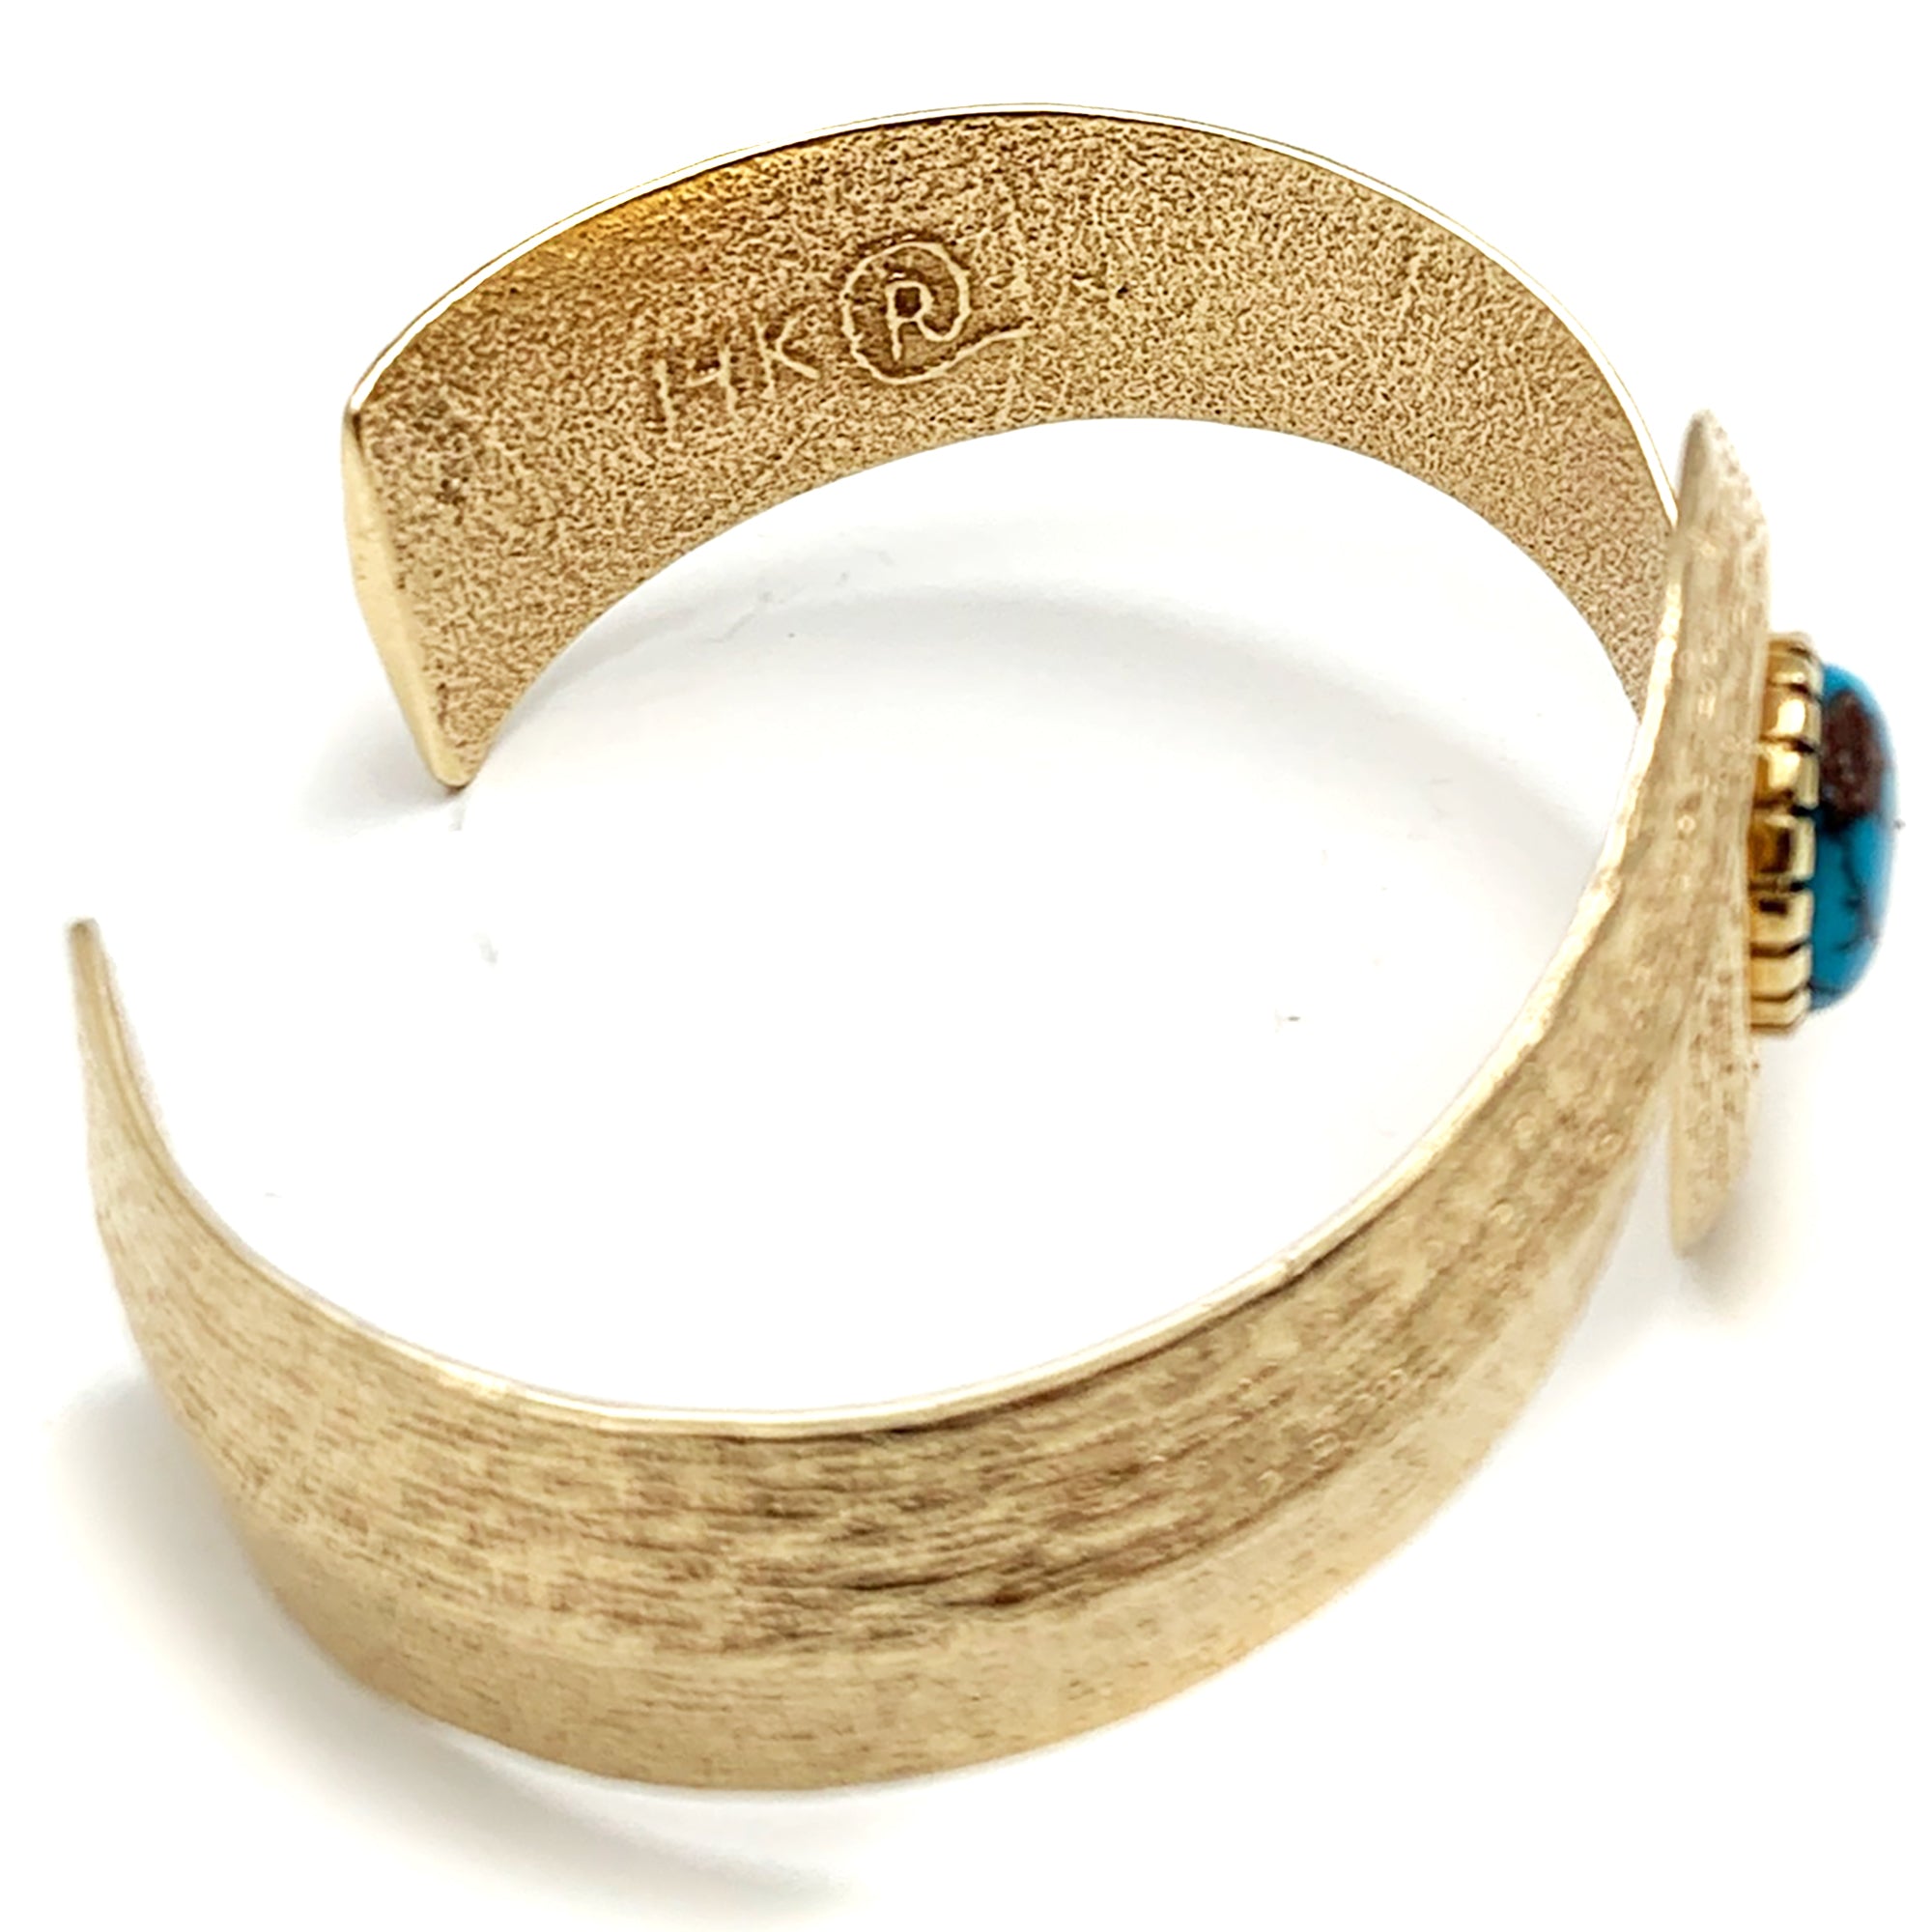 SOLD - Ric Charlie 14k Gold Tufa Cast Cuff Bracelet with Bisbee Turquoise